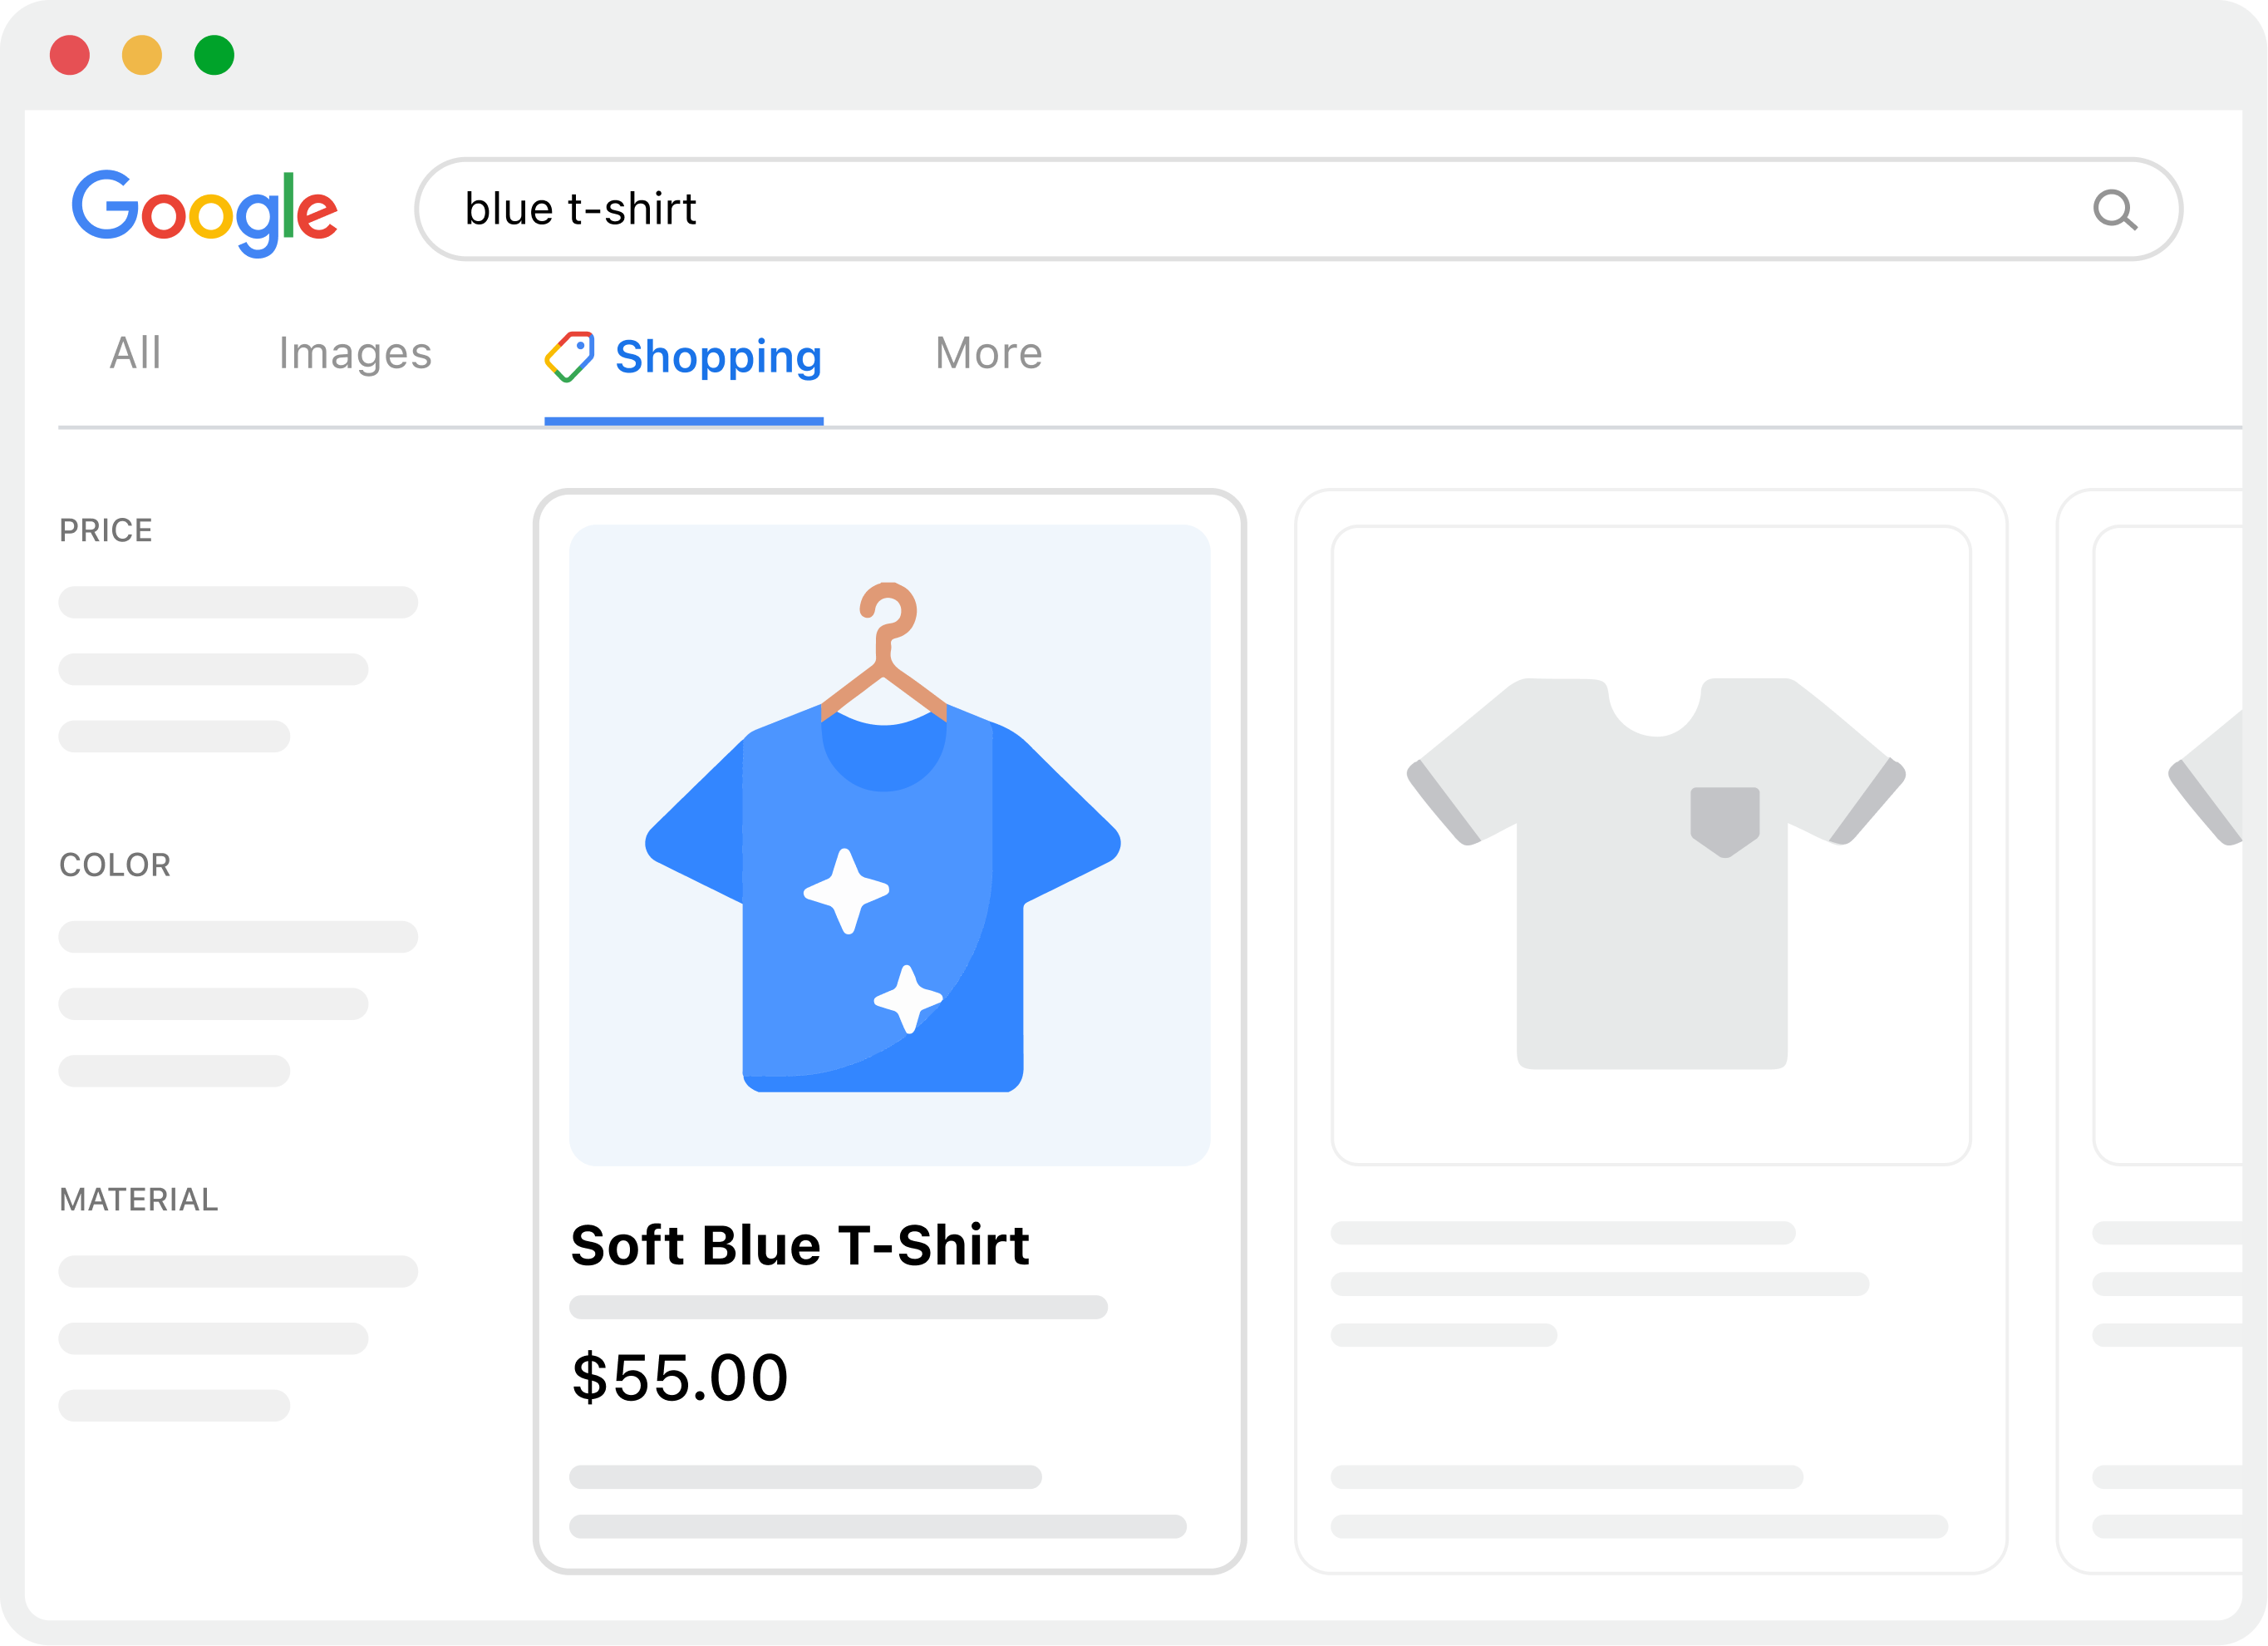 Illustrated Google product result for a blue t-shirt